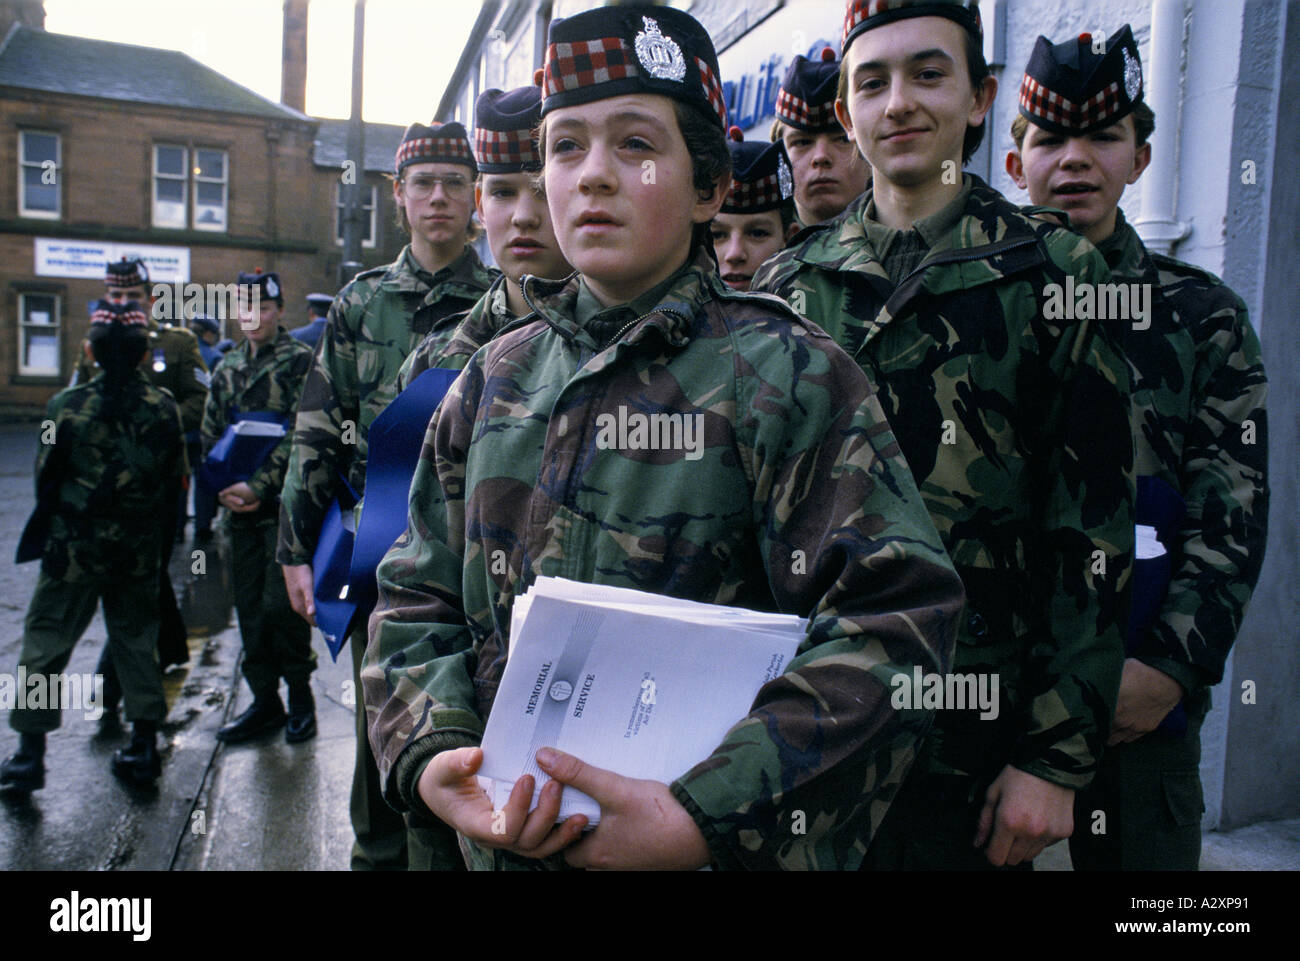 male female army cadets from scottish regiment at the lockerbie memorial service dryfesdale cemetary 04 01 1989 1989 Stock Photo